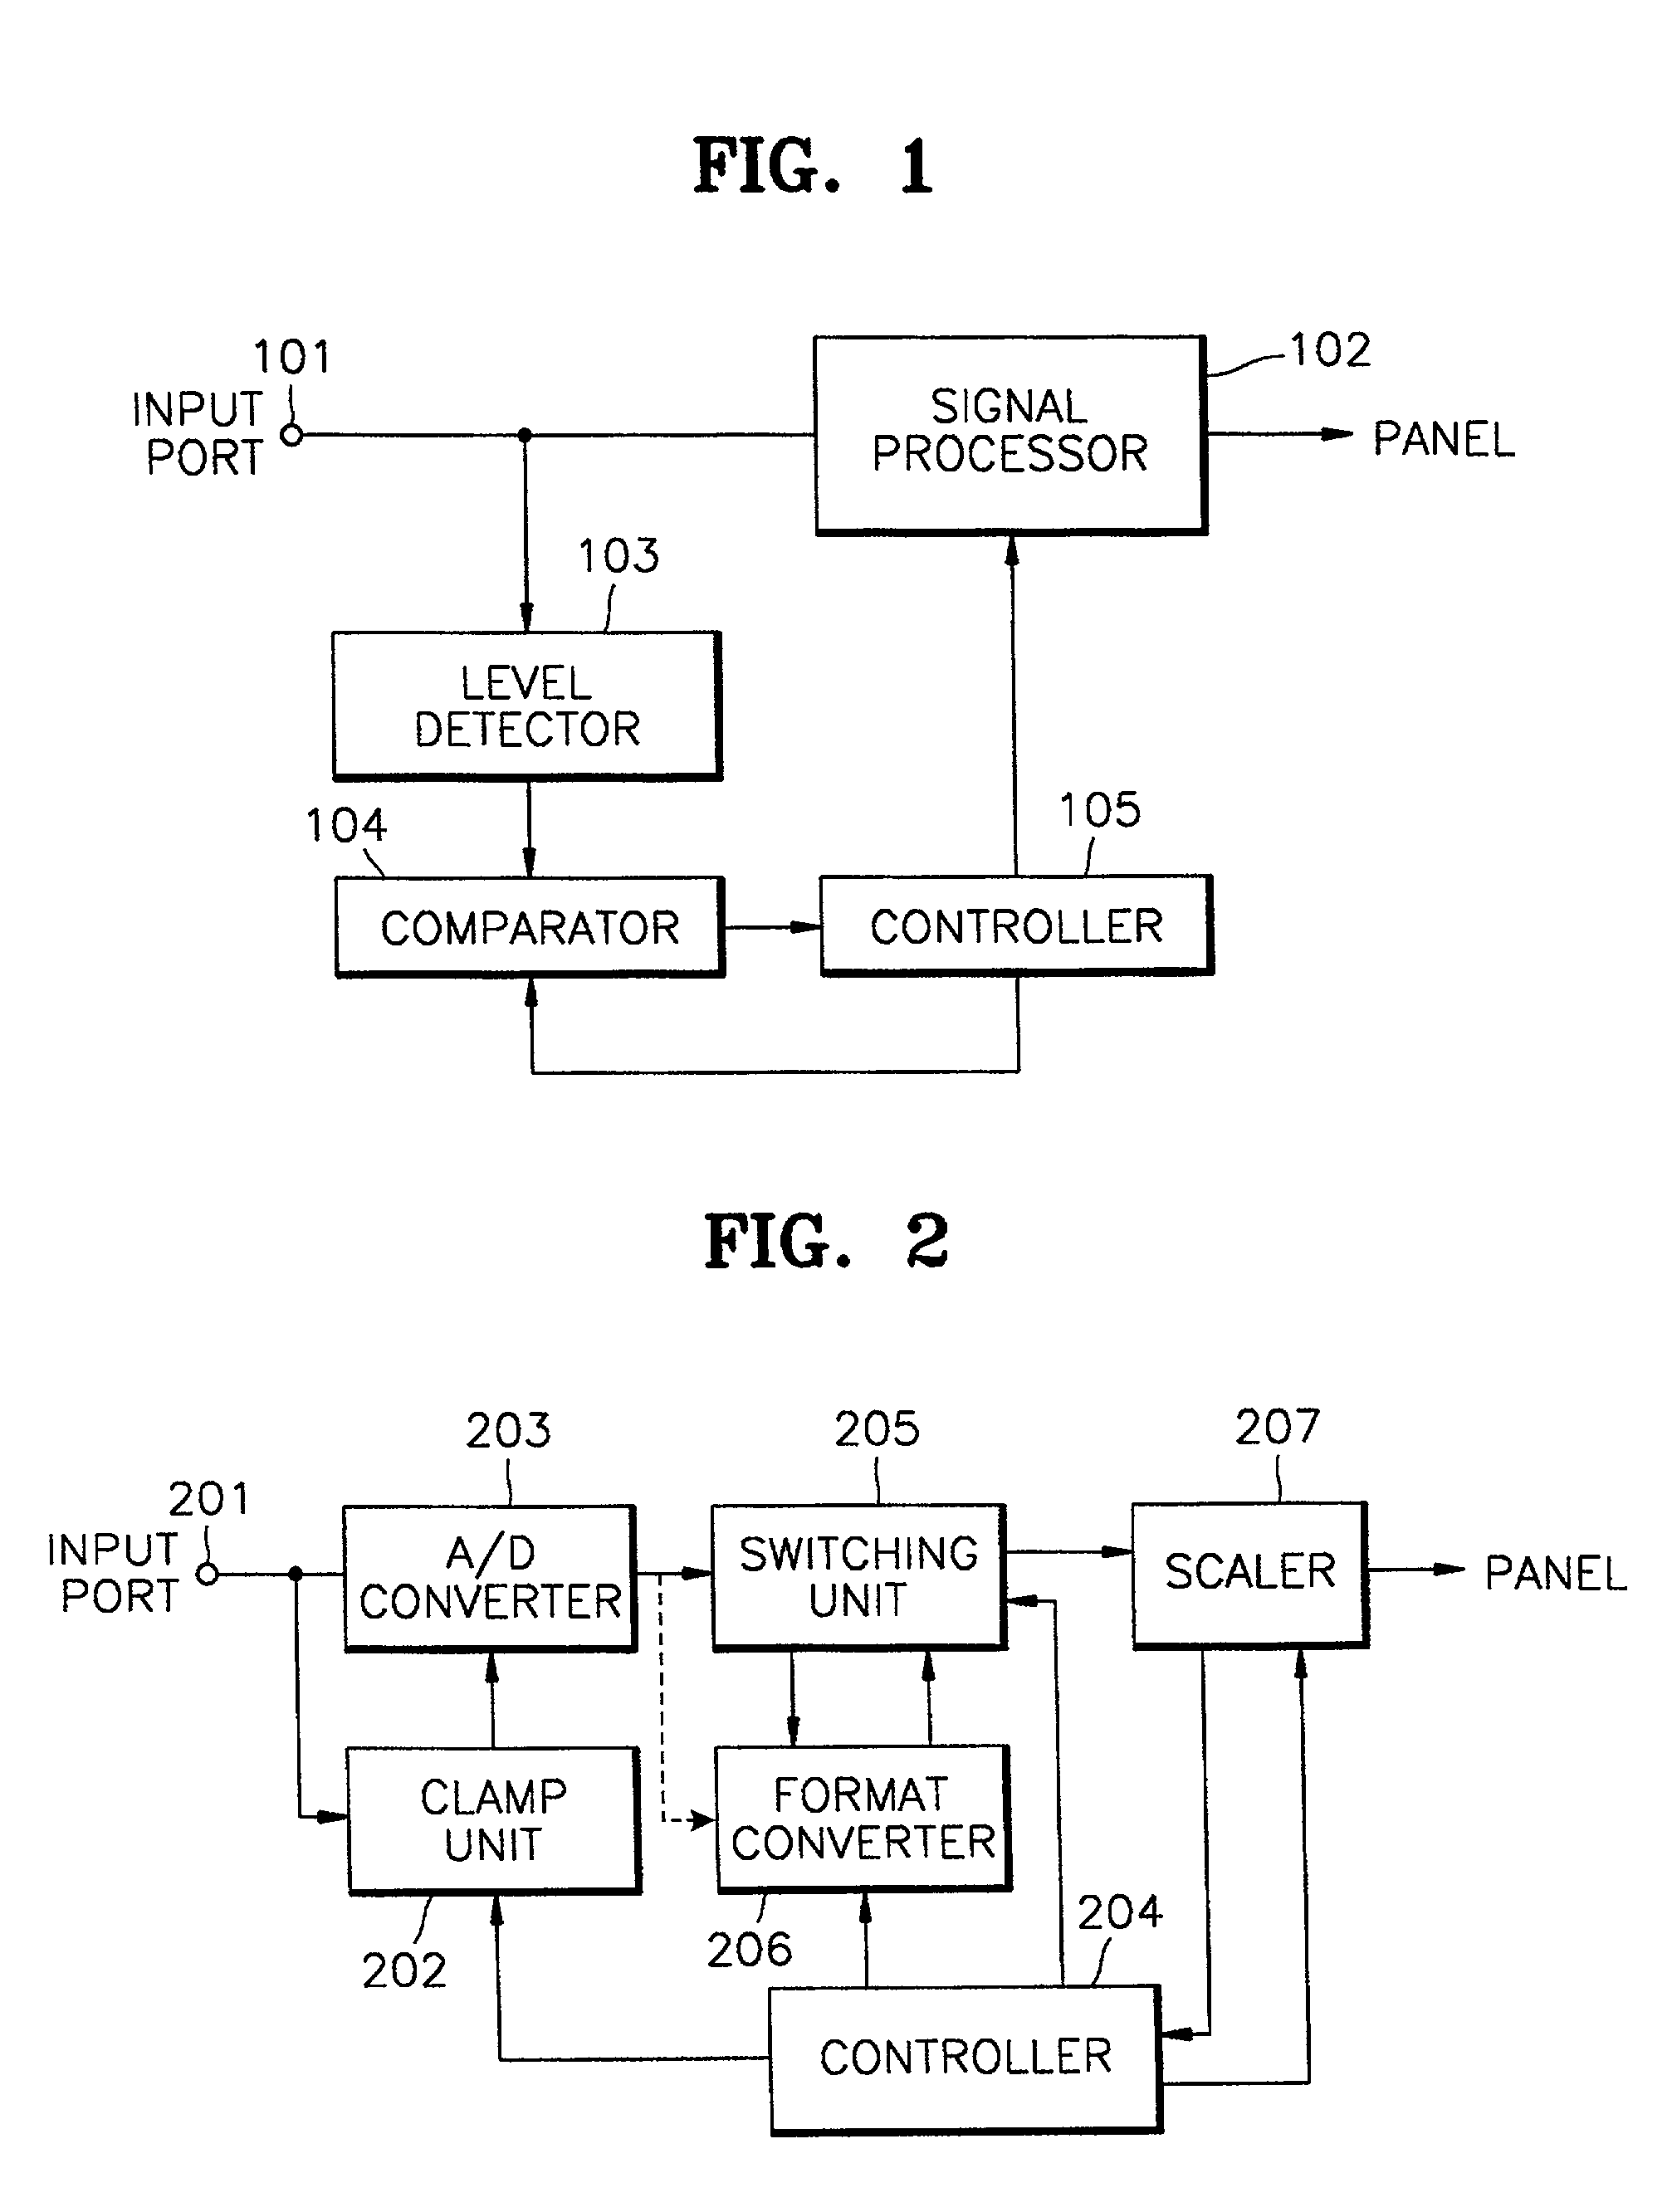 Device and method for automatically discriminating between formats of video signals